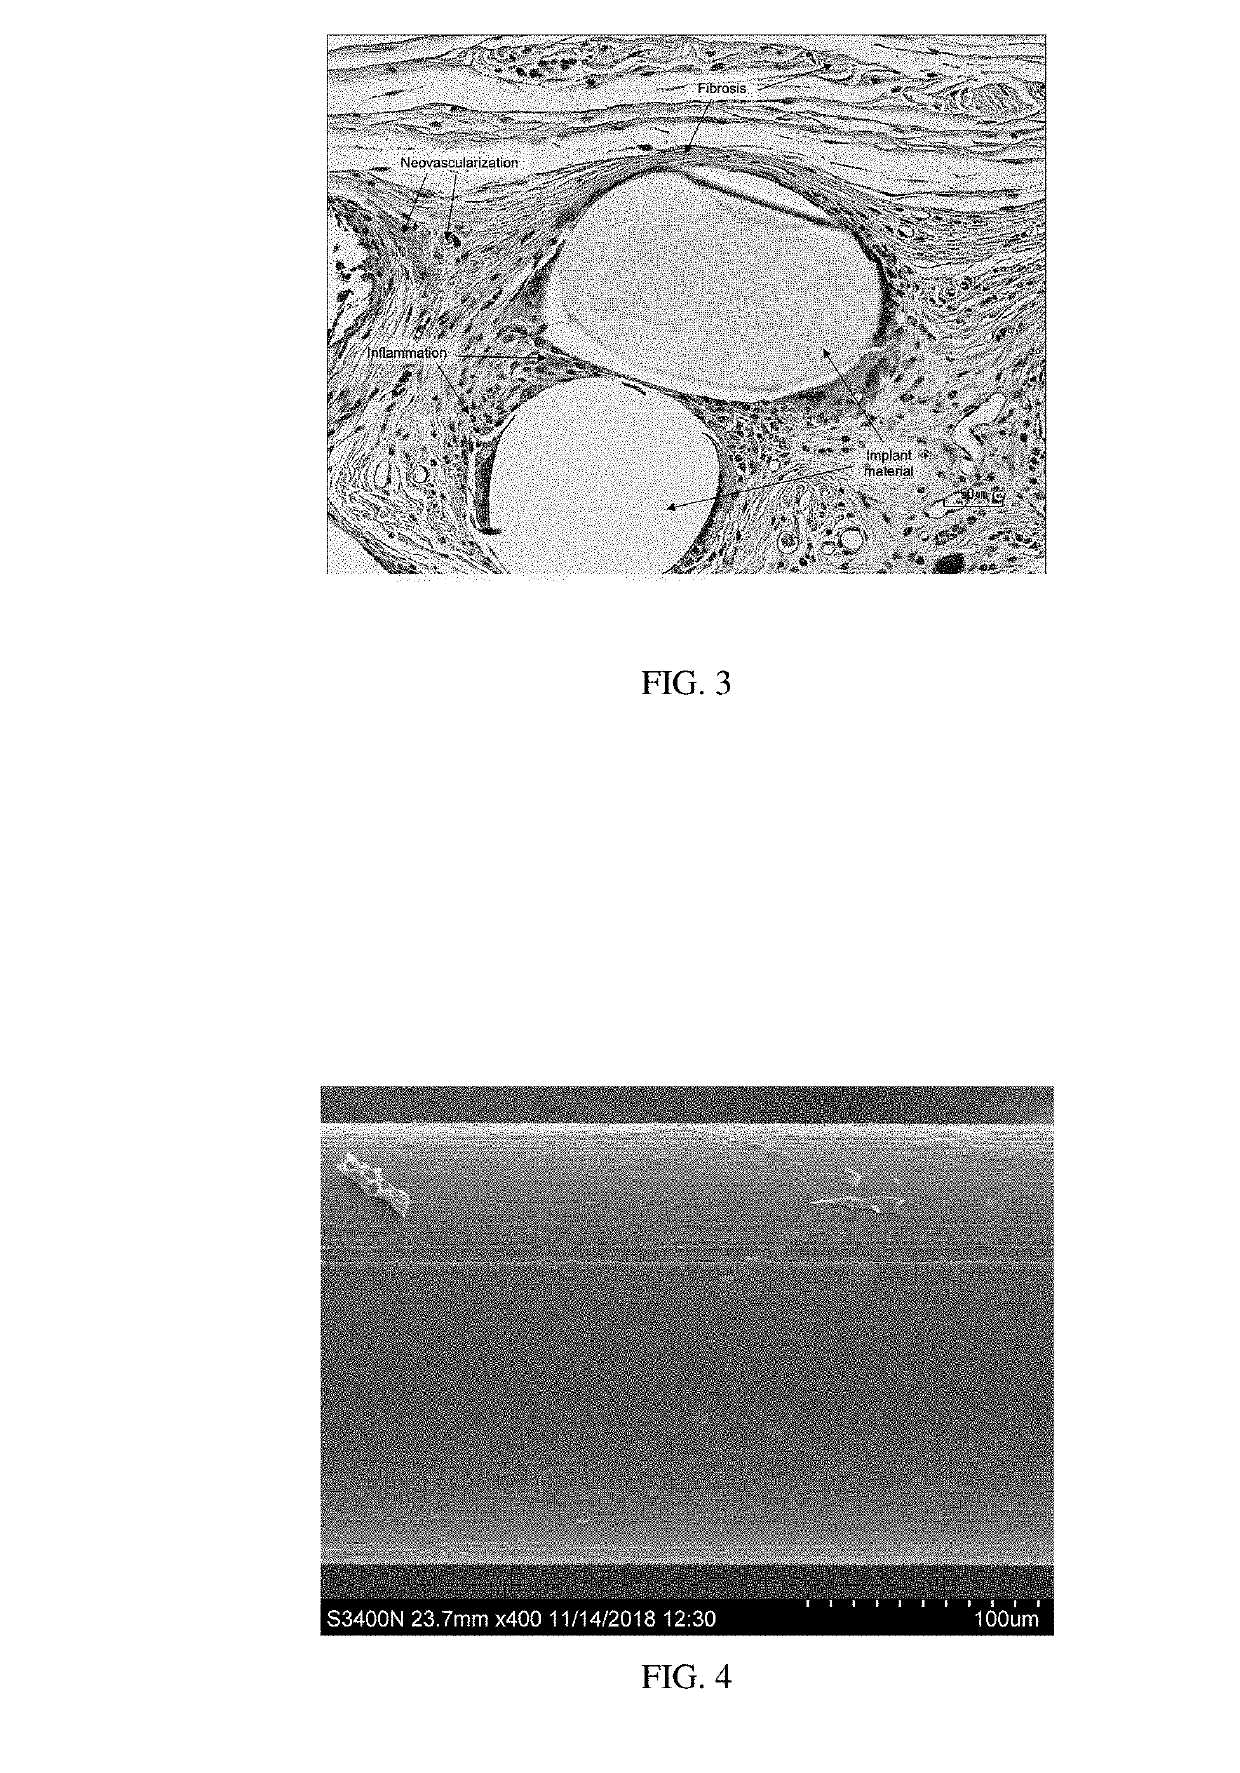 Yarns and fibers of poly(butylene succinate) and copolymers thereof, and methods of use therof